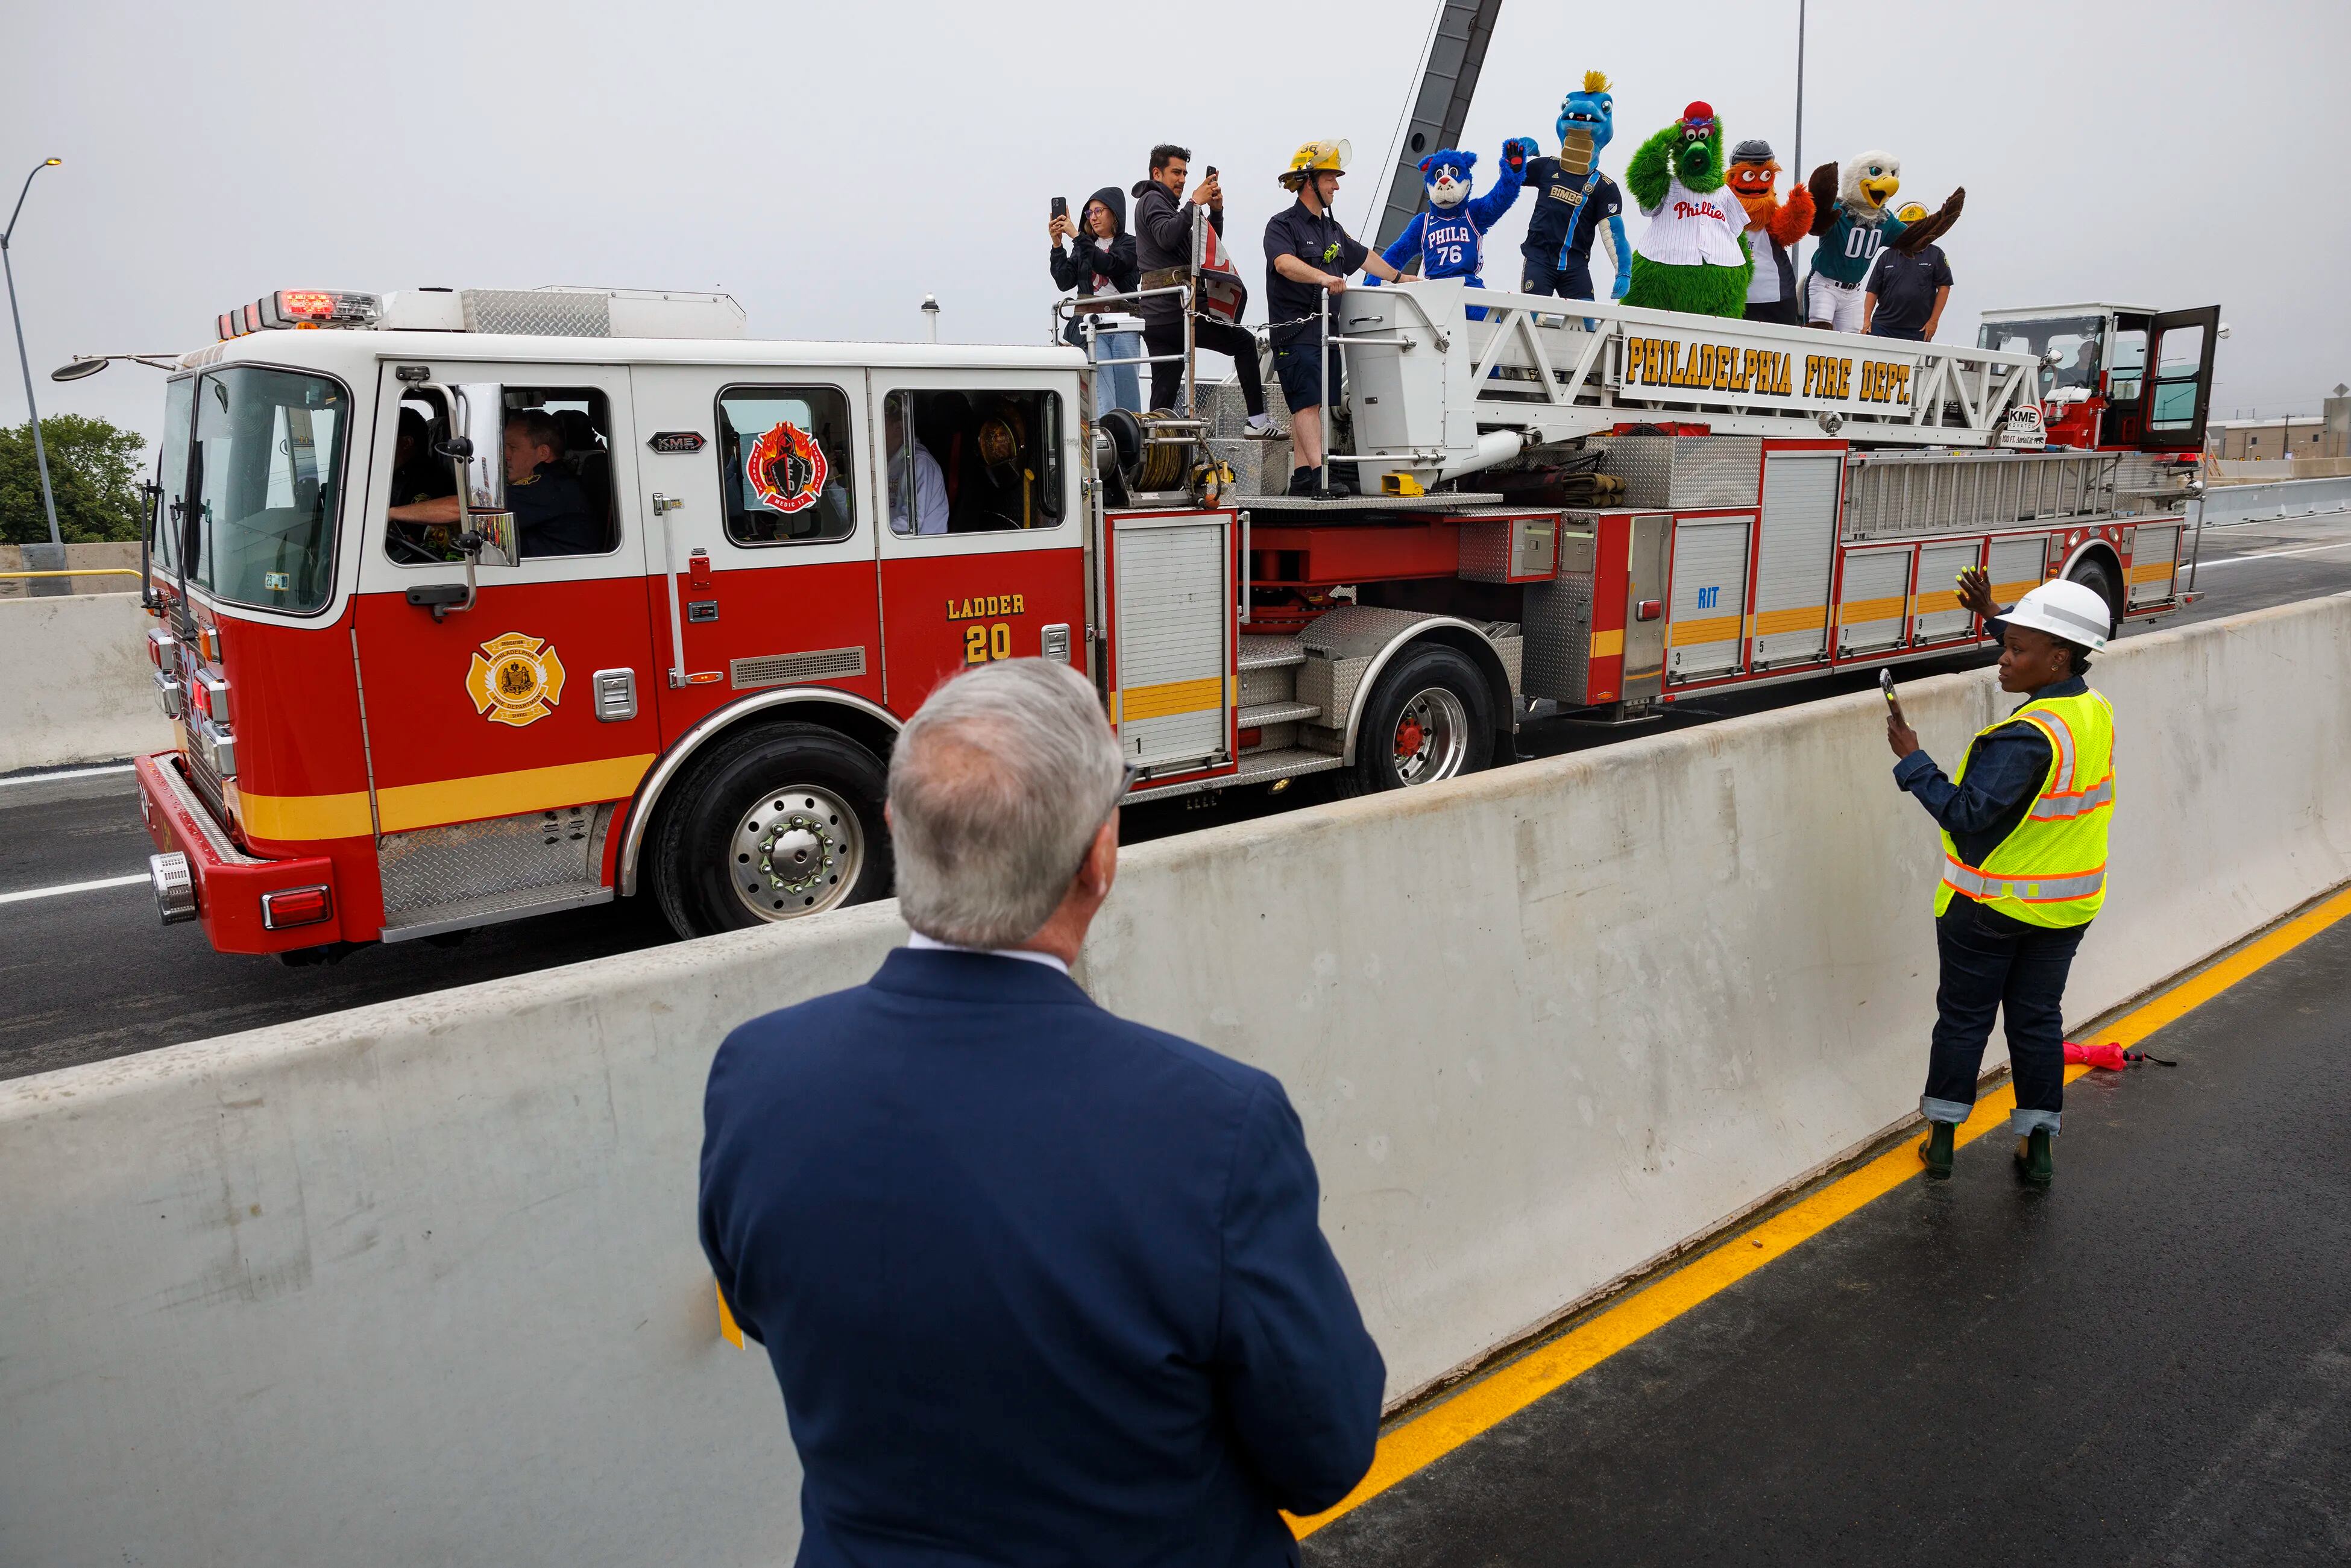 Philly Fire Dept. & team mascots celebrate the reopening of temporary lanes  after I-95 collapse 